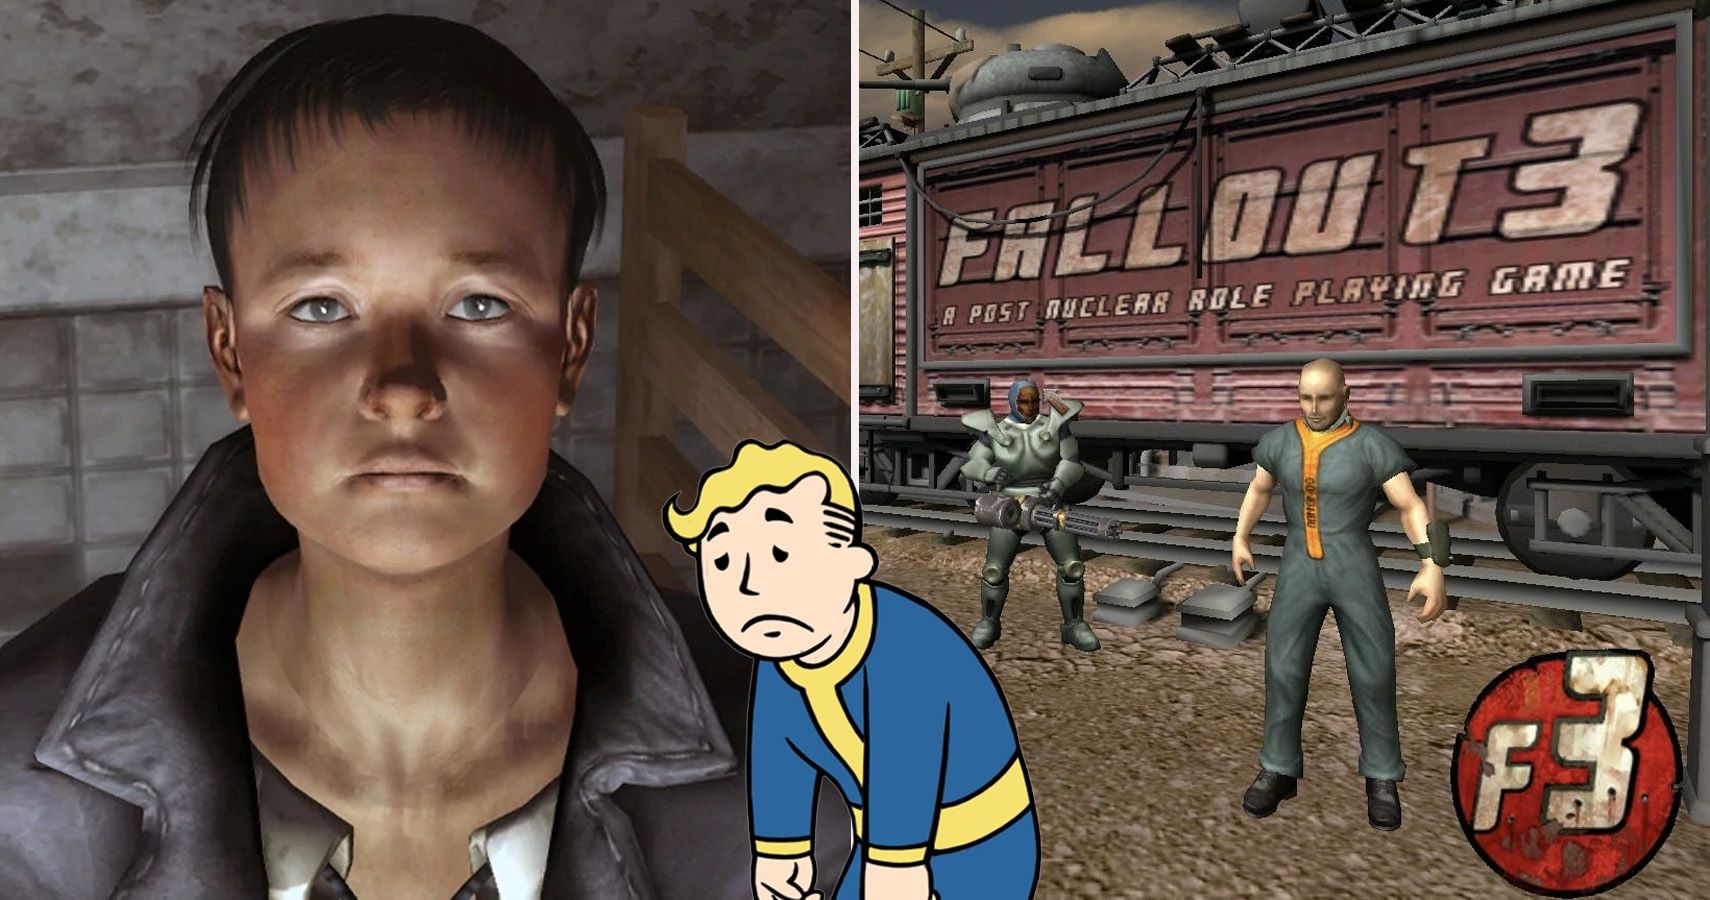 Fallout 3: Van Buren companions would have changed the game world